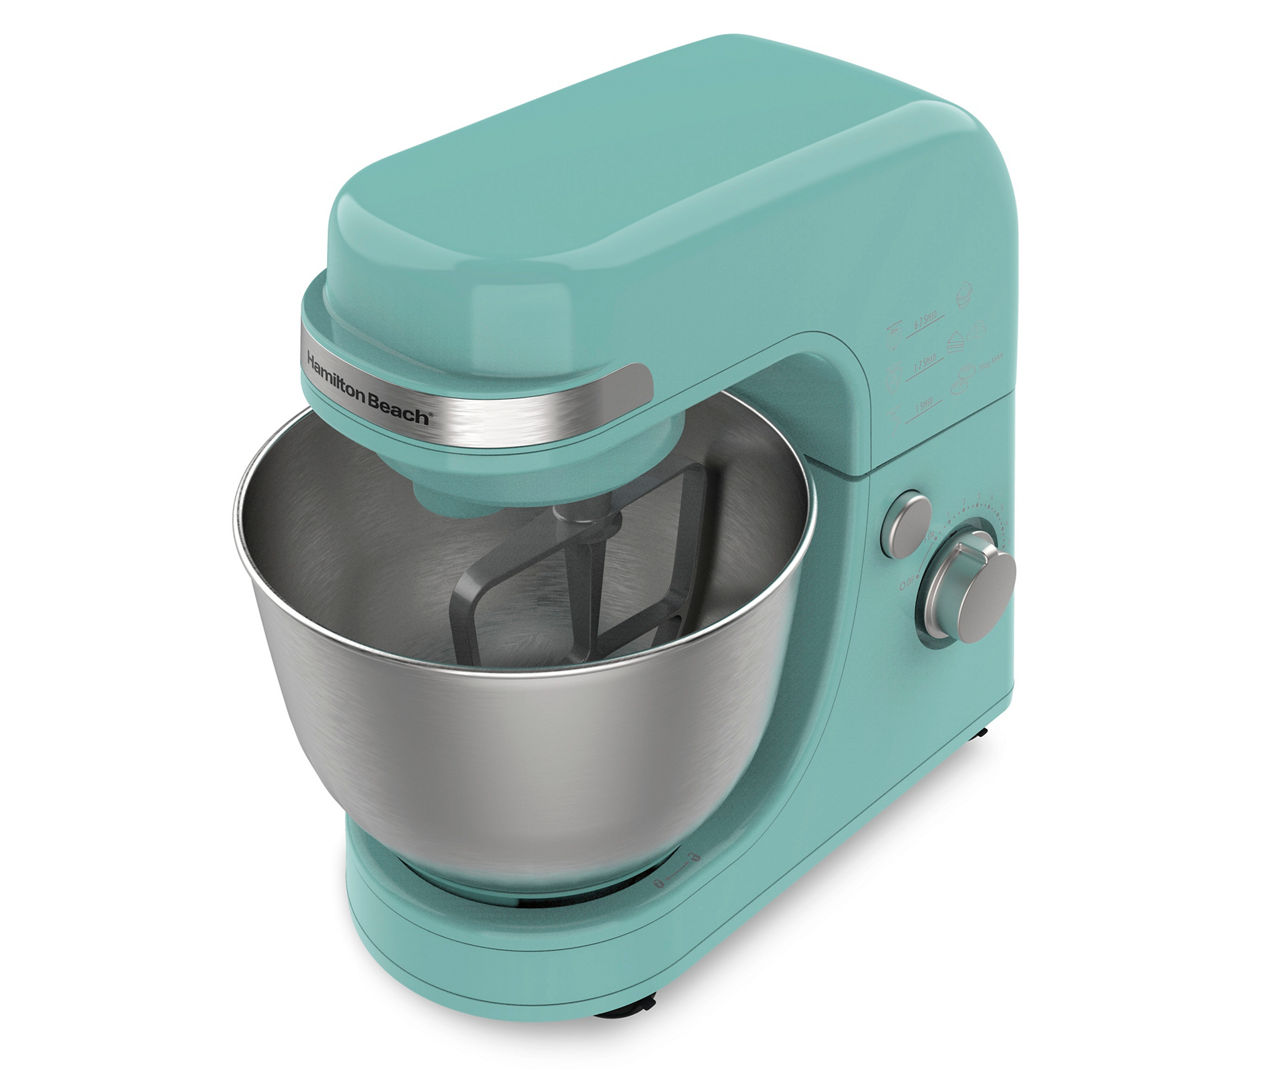 What's a stand mixer? - Coolblue - anything for a smile